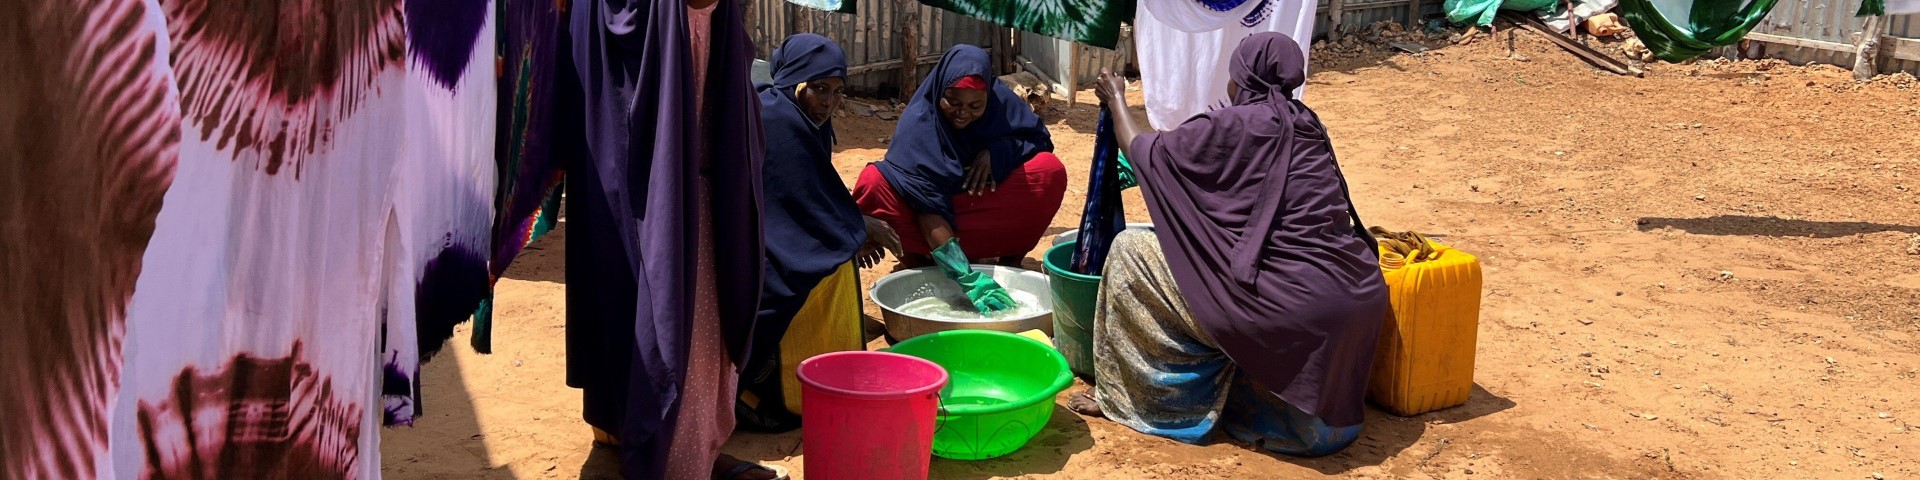 Four women tie-dye cotton fabrics. In the background, dyed fabrics are hung on a line to dry. The dyed fabrics are then sold on the market and later made into traditional Somali dresses.